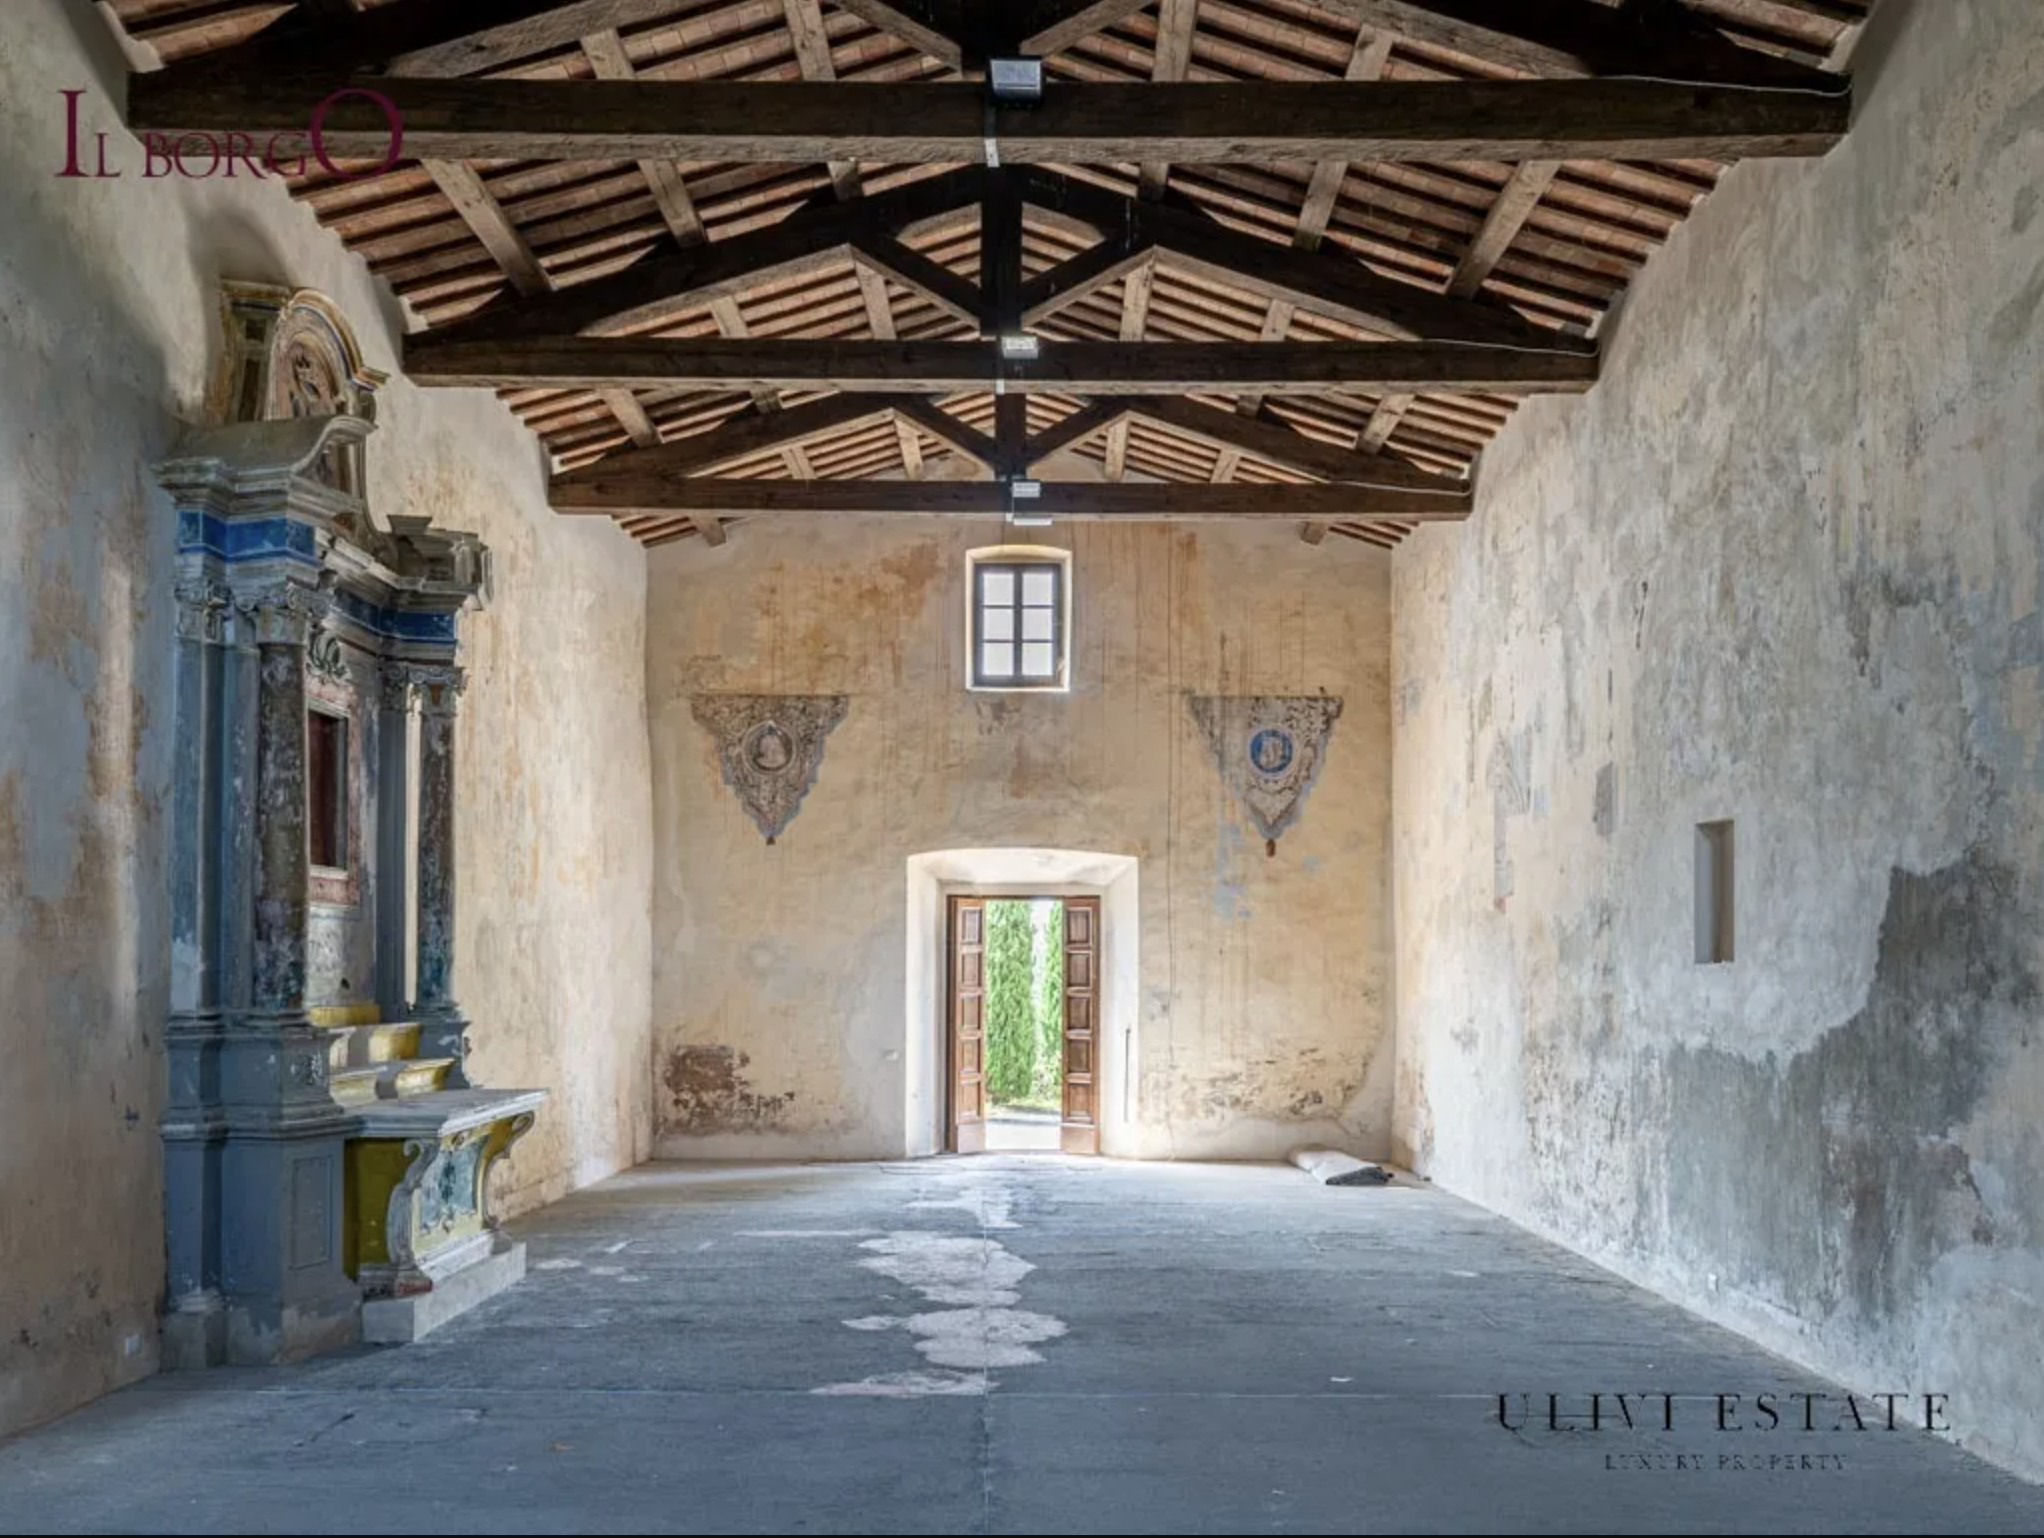 Francis York Borgo Pieve di Comunaglia in Umbria, Italy With 17 Country Houses, 1000-Year-Old Church, Vineyards 00017.png